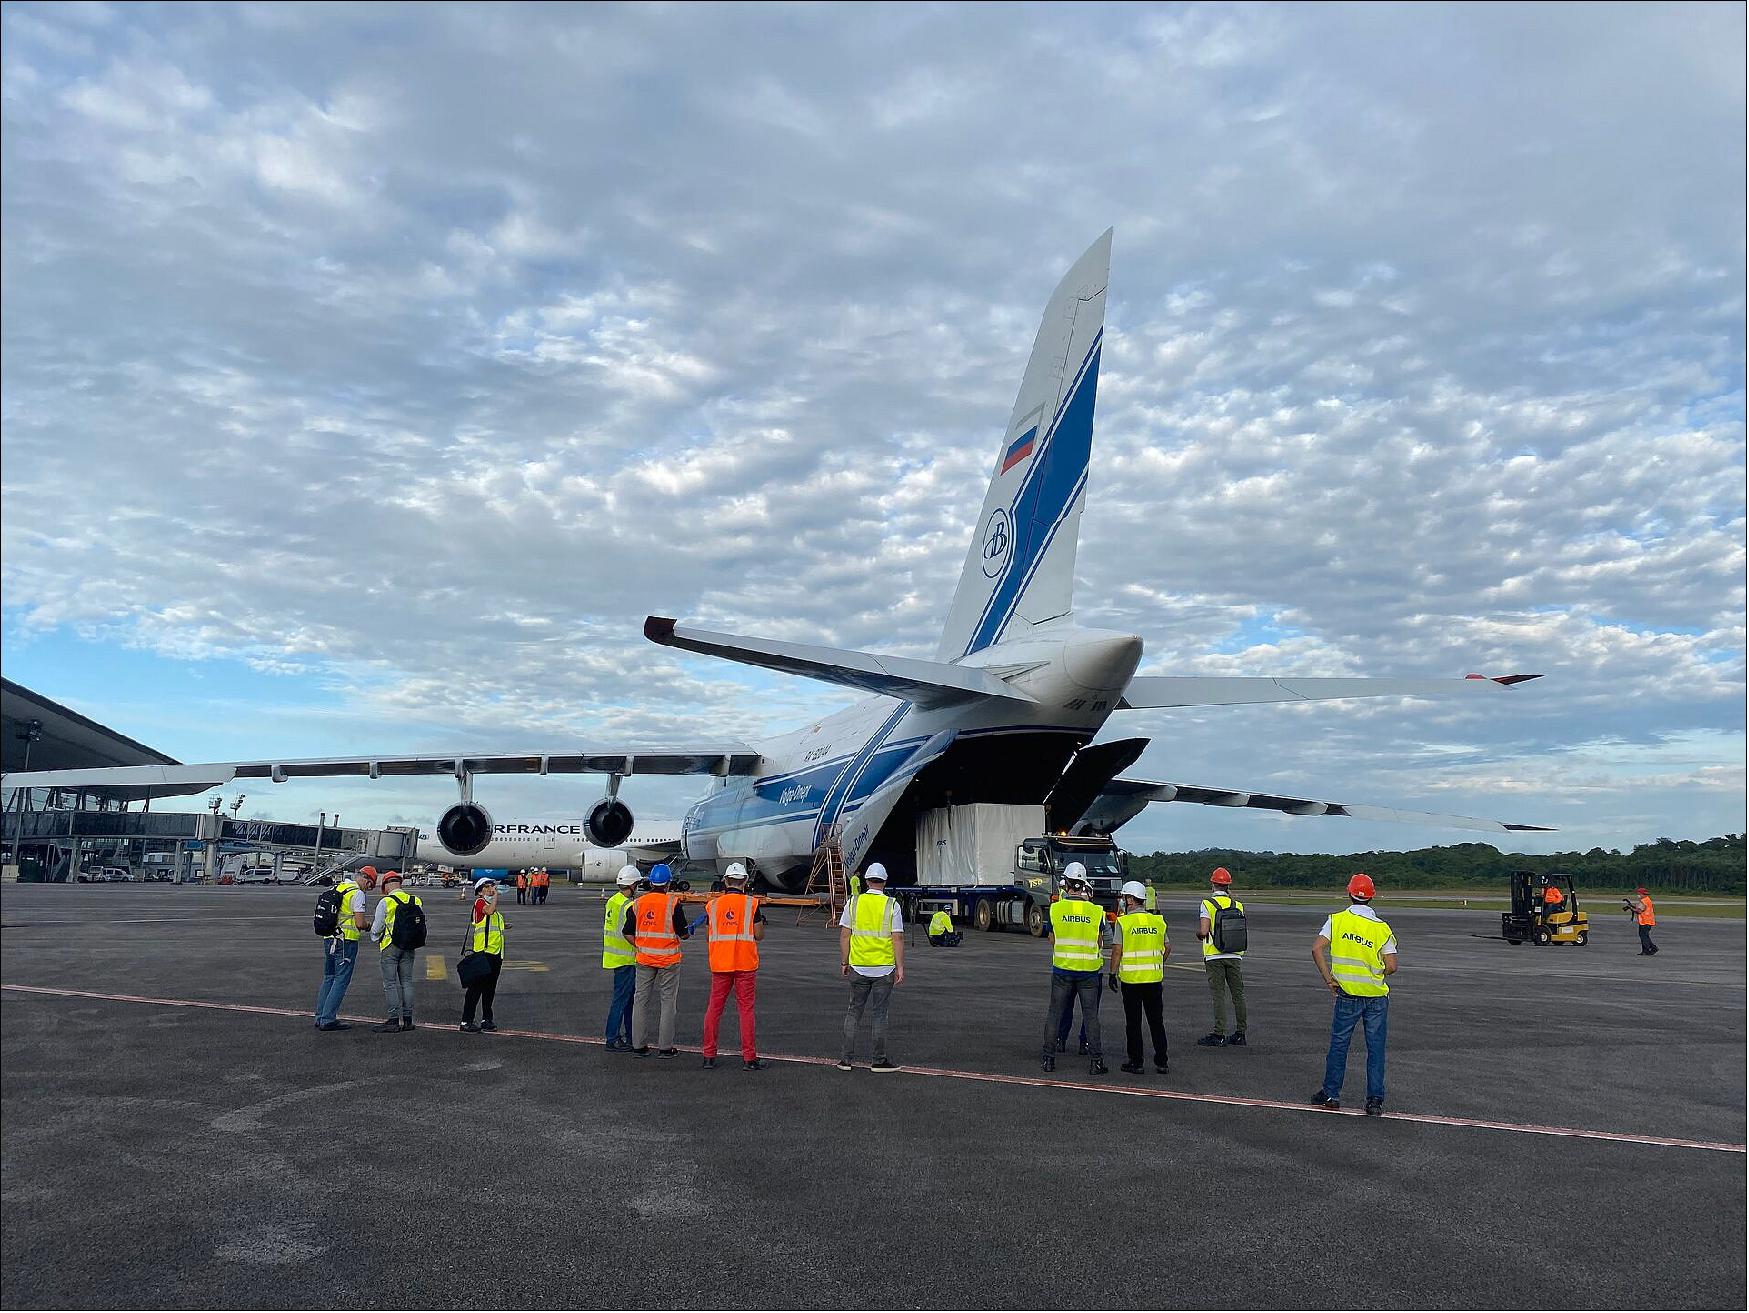 Figure 12: The Spanish high-resolution land imaging mission, known as SEOSAT-Ingenio, has arrived safely at Europe's Spaceport in French Guiana (image credit: ESA)